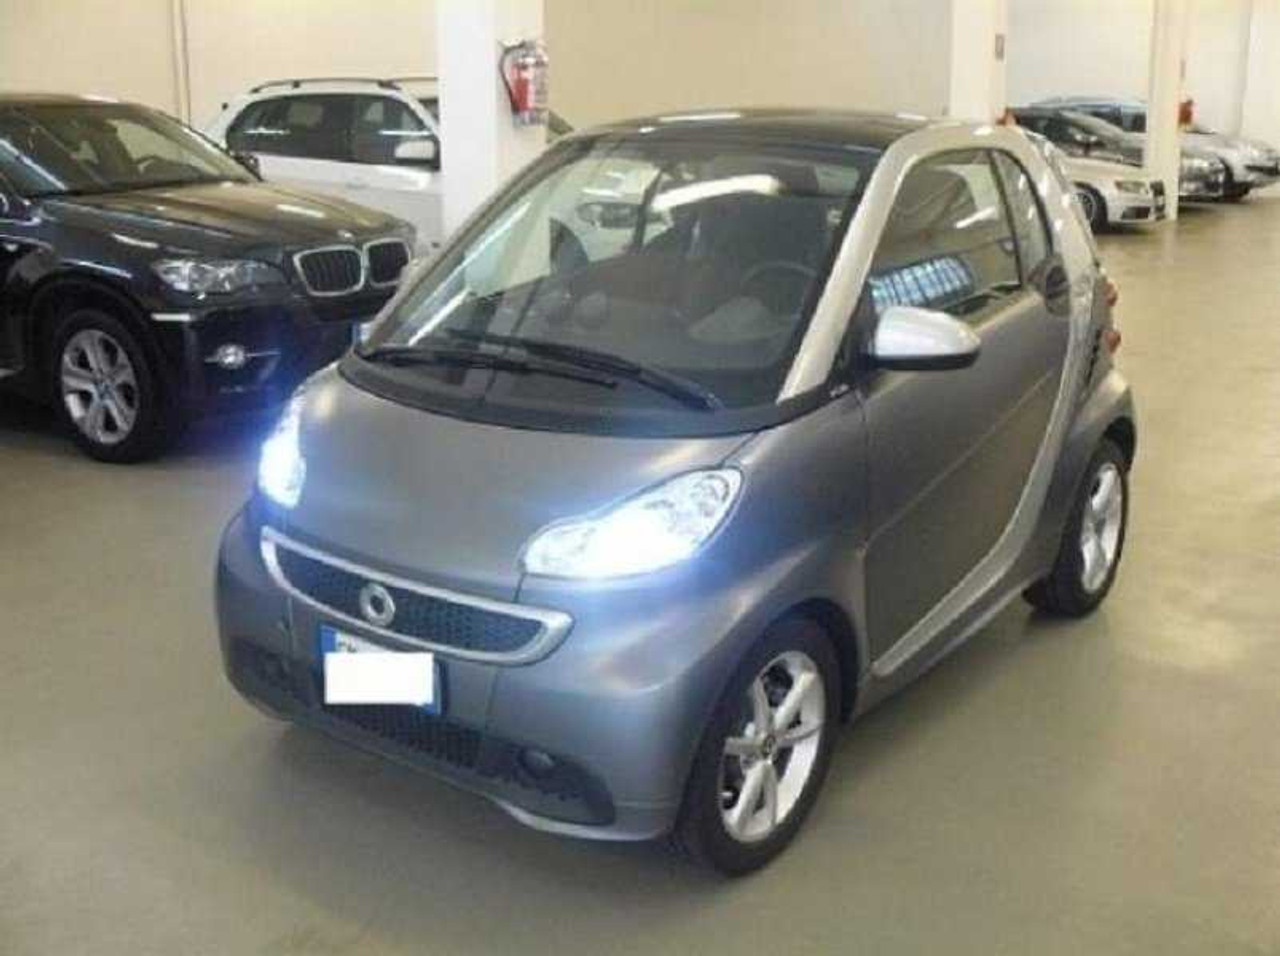 BlingLights Brand Xenon HID Headlight Conversion Kit for Smart Fortwo